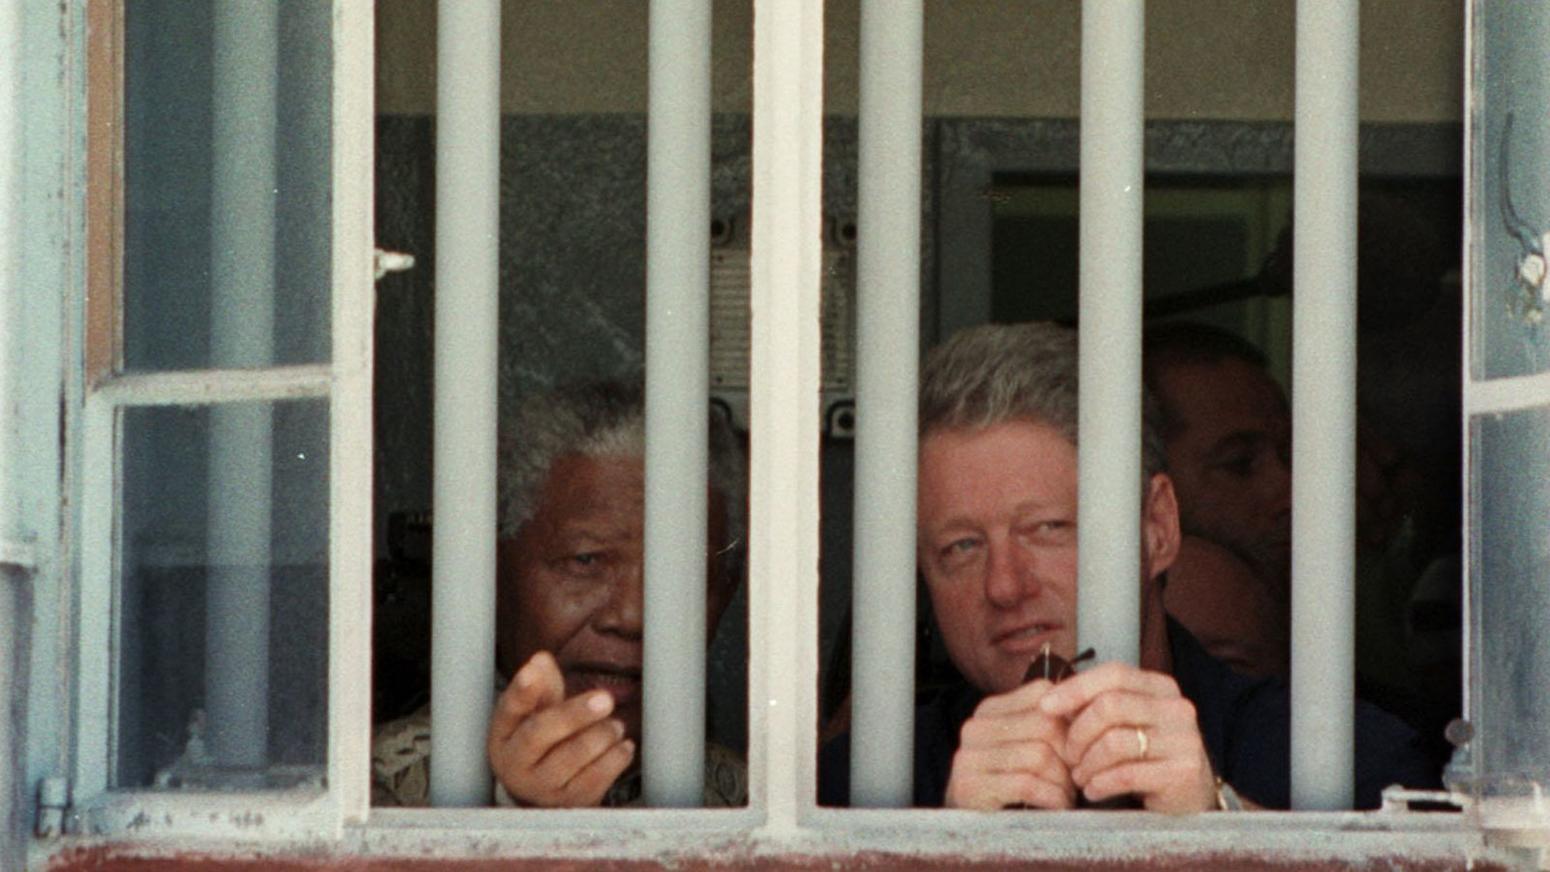 South African President Nelson Mandela and then-U.S. President Bill Clinton peer out of the window of the jail cell at Robben Island, where Mandela spent 18 of the 27 years he was in prison.